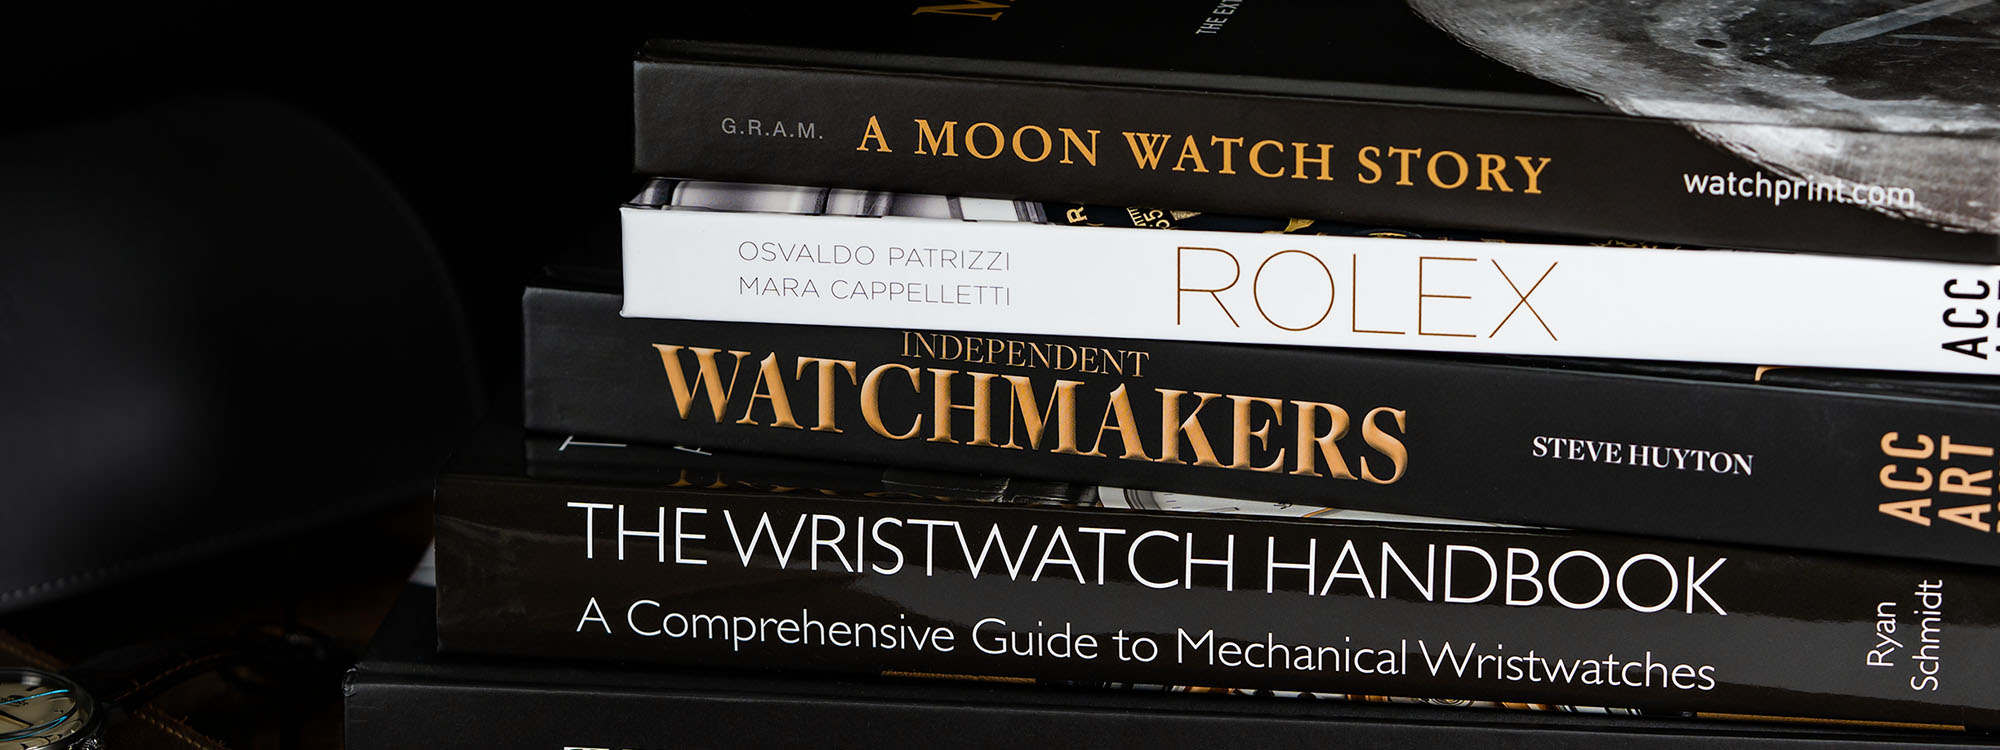 The World's Most Expensive Watches - ACC Art Books US